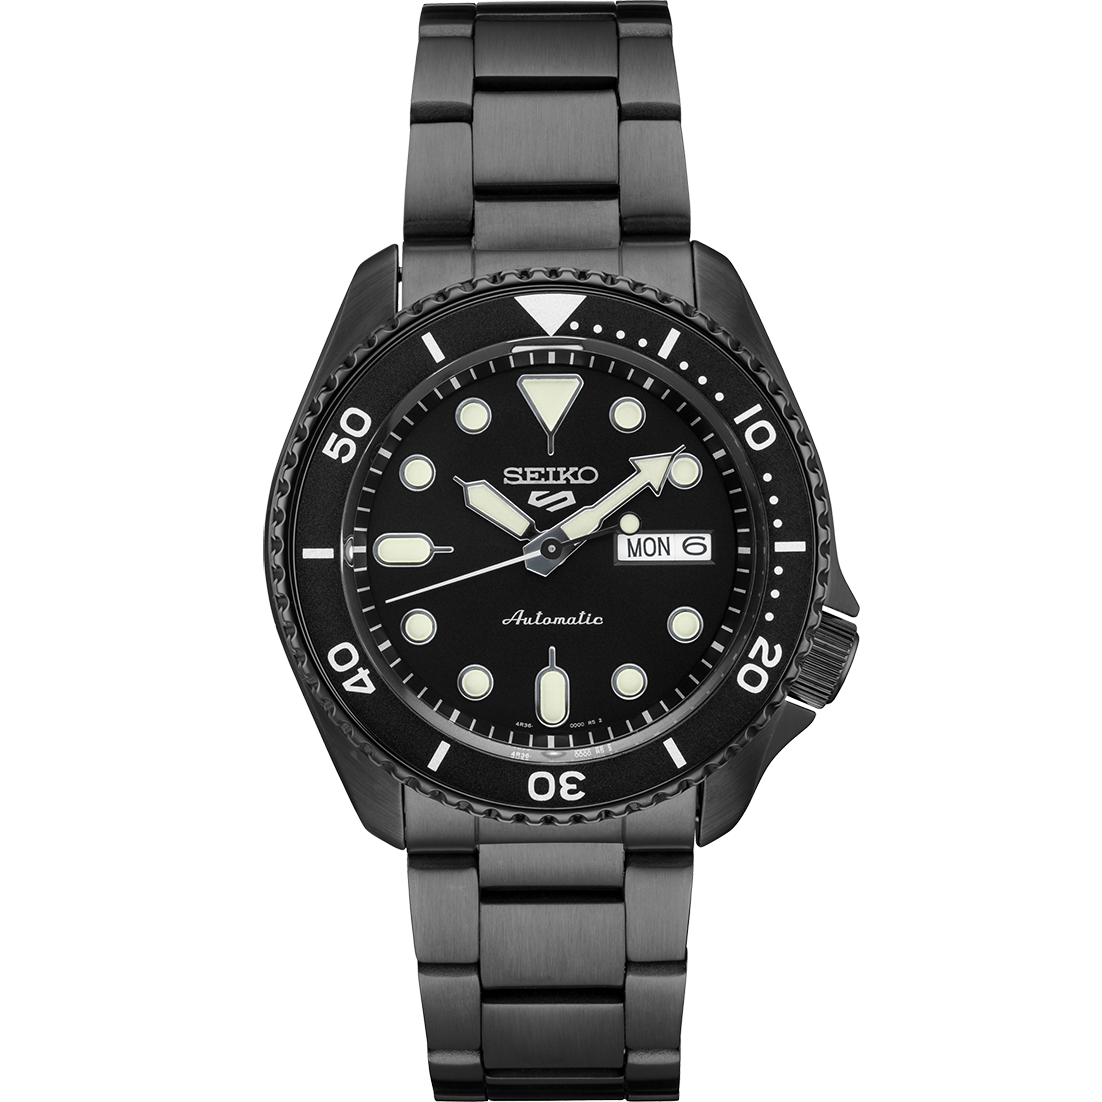 Seiko-5-Sports-SRPD65-Black-PVD-Steel-425-mm-Day-Date-Automatic-Mens-Watch-115263543891